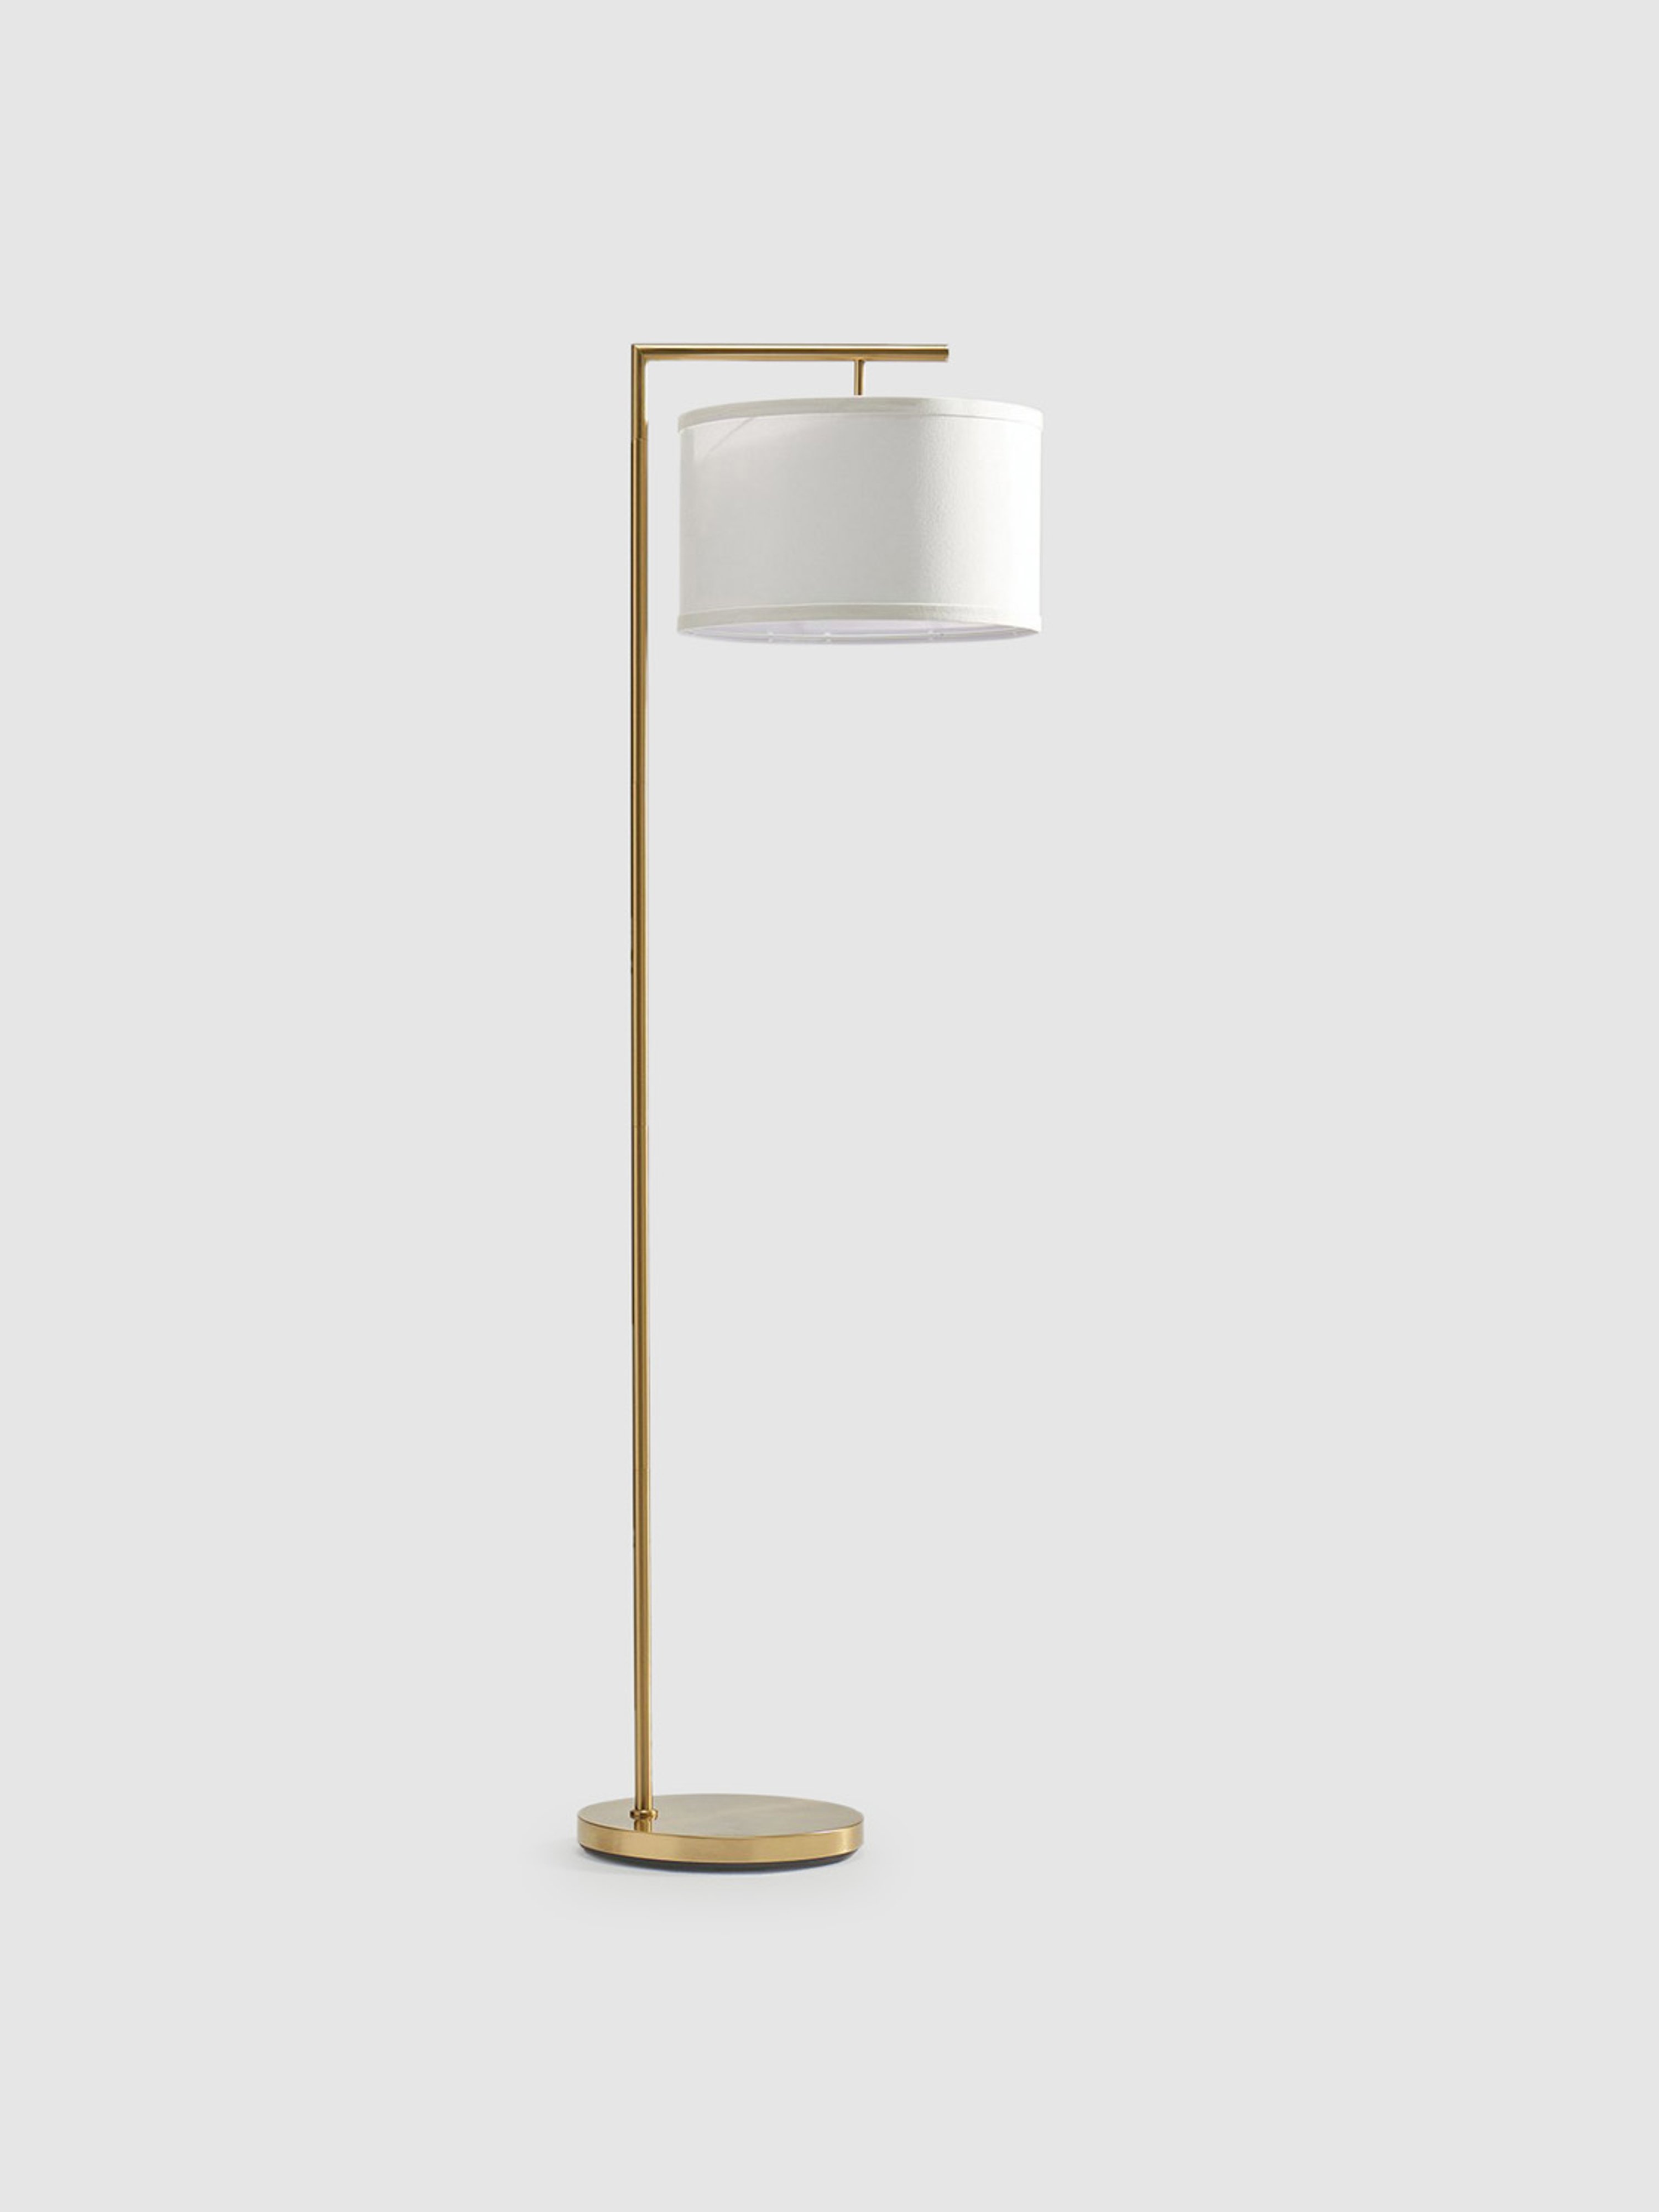 Brightech Montage Modern Led Floor Lamp In Gold